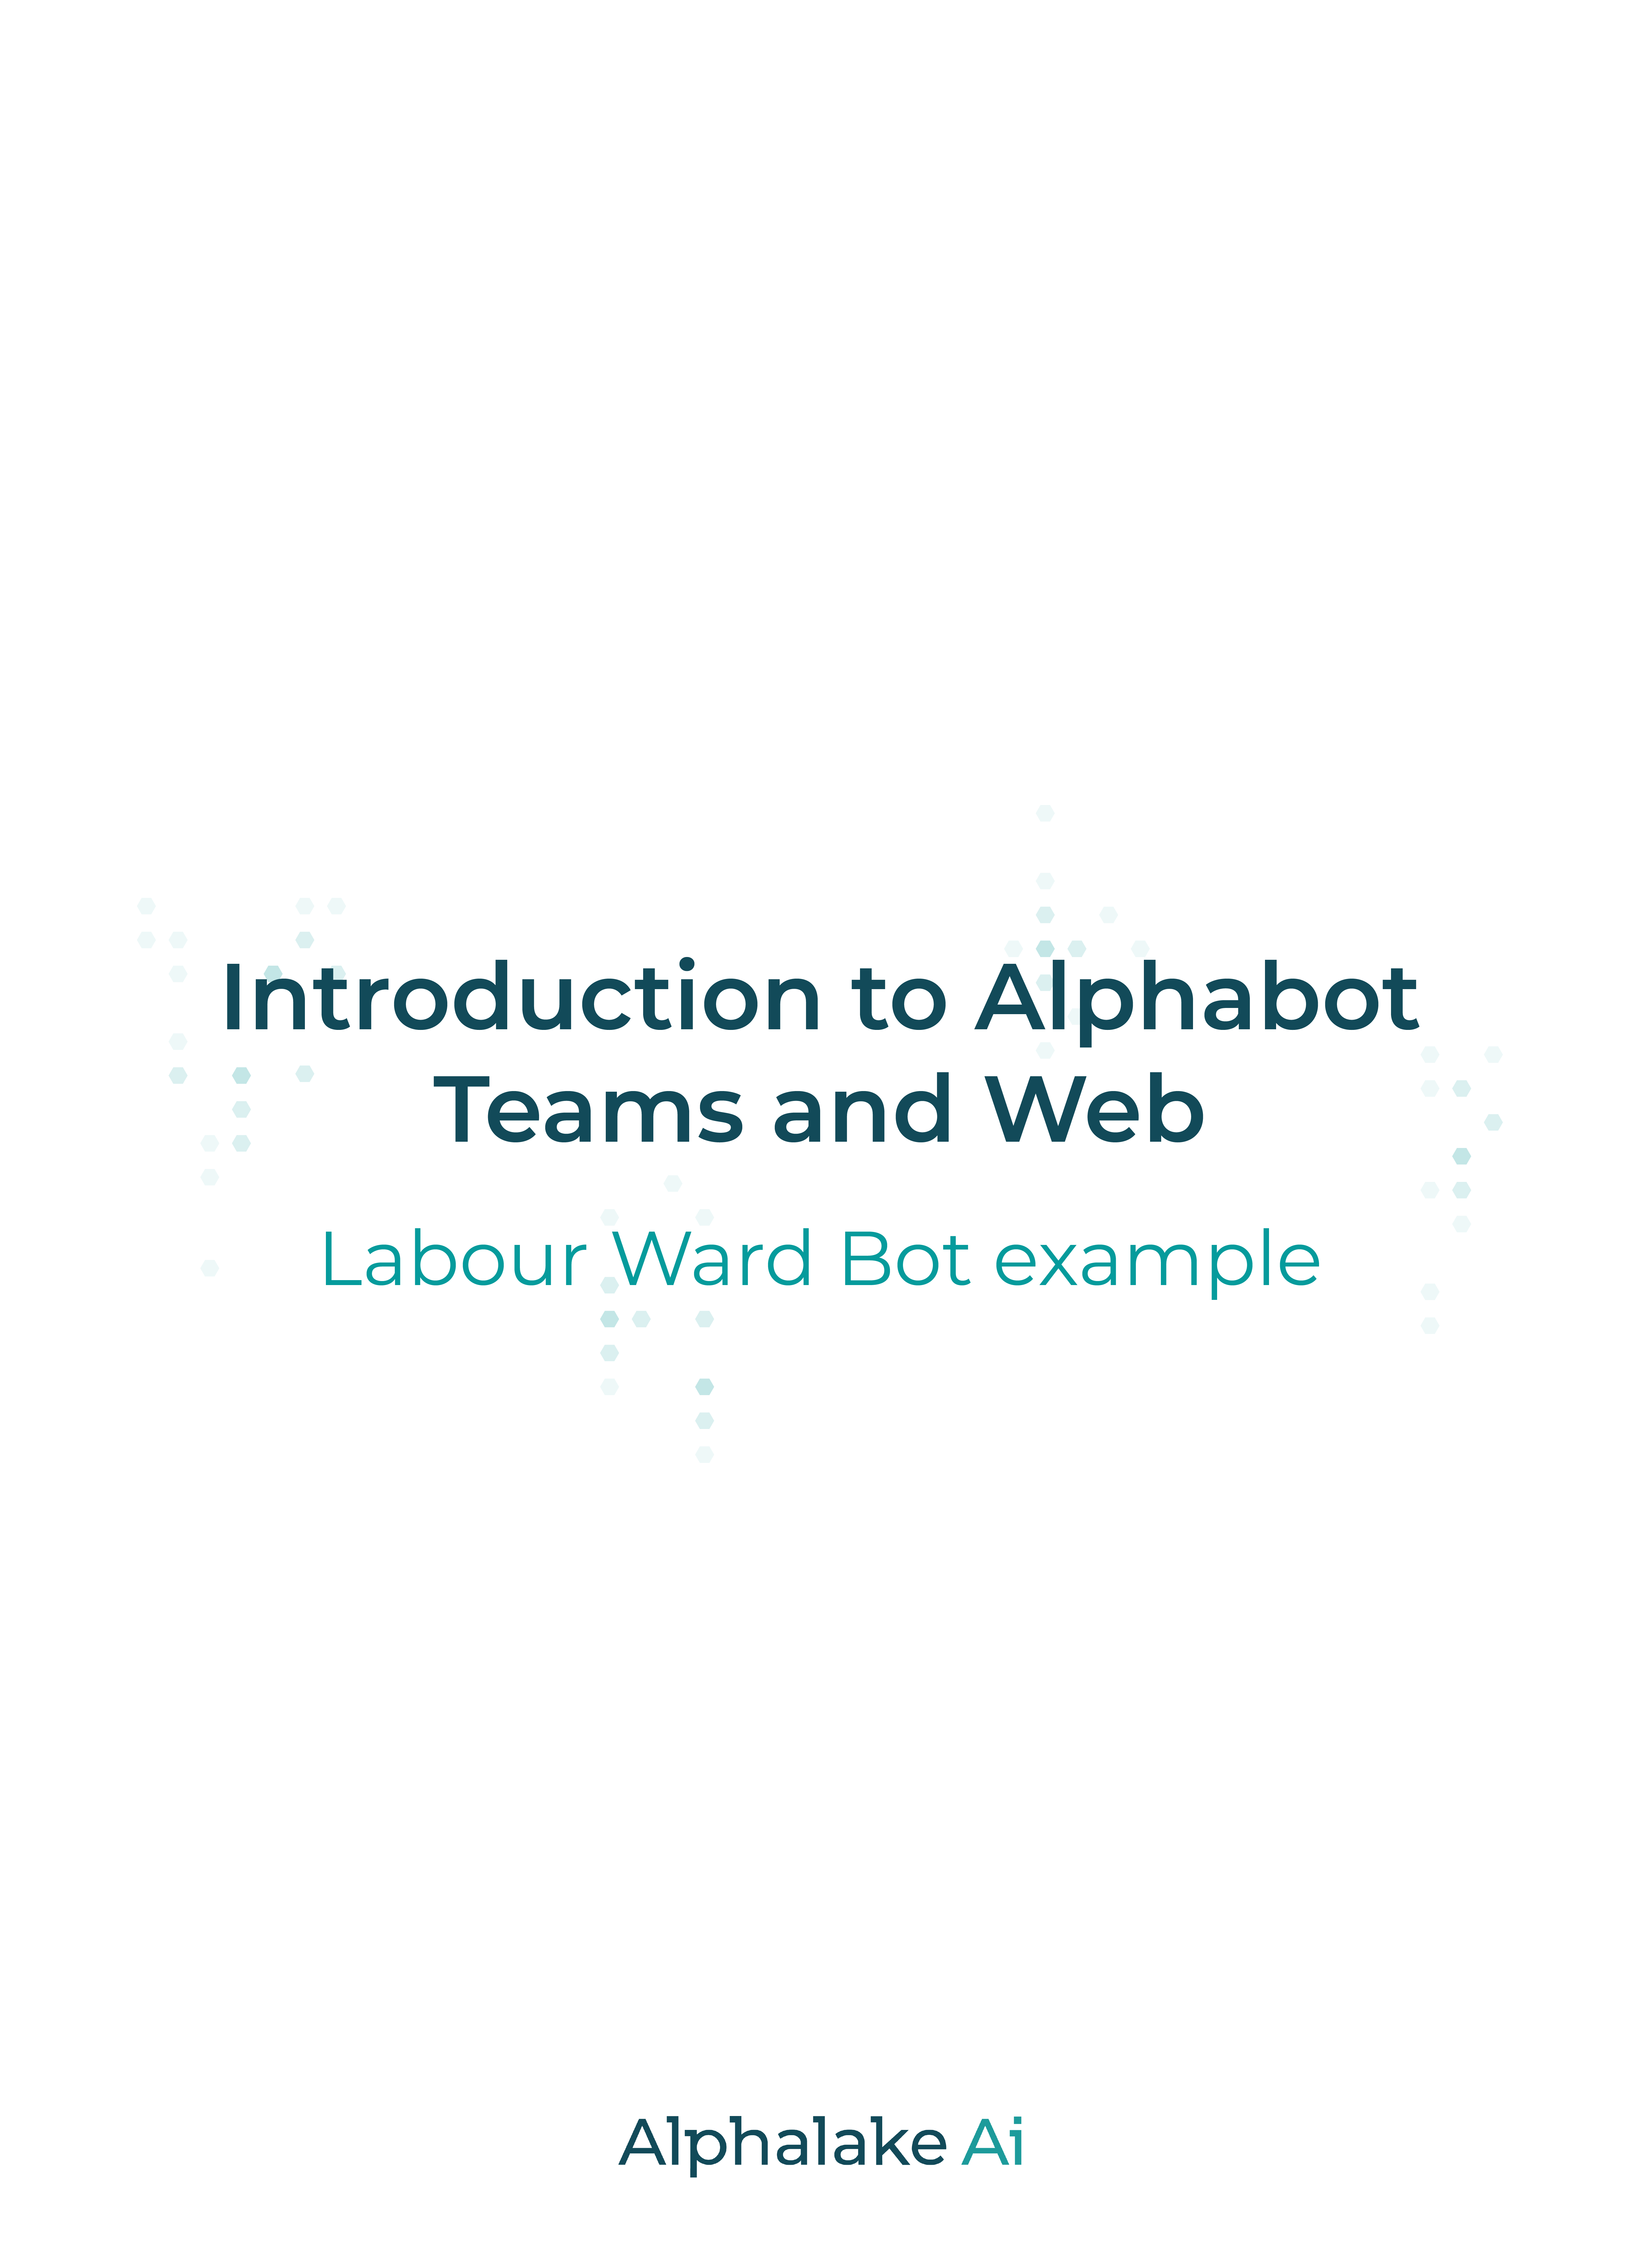 Introduction to Alphabot Teams and Web